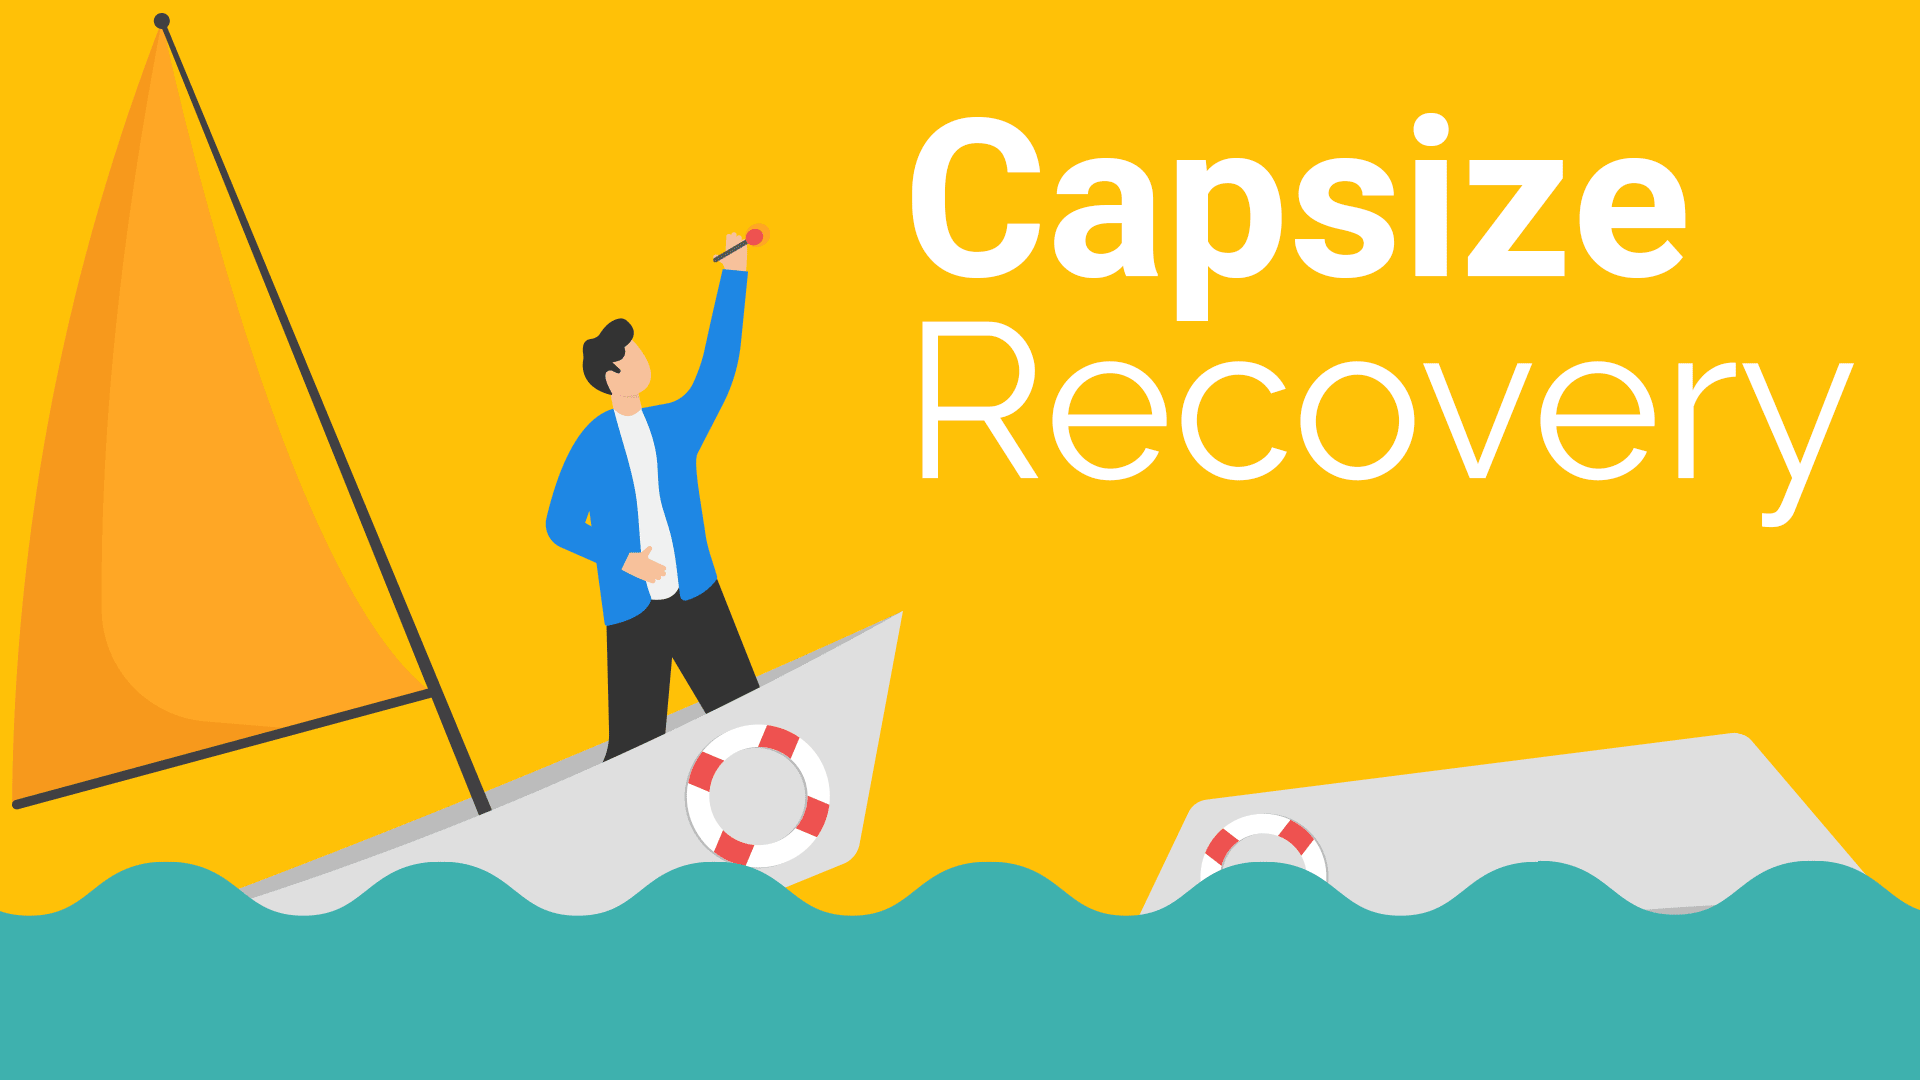 Capsize recovery